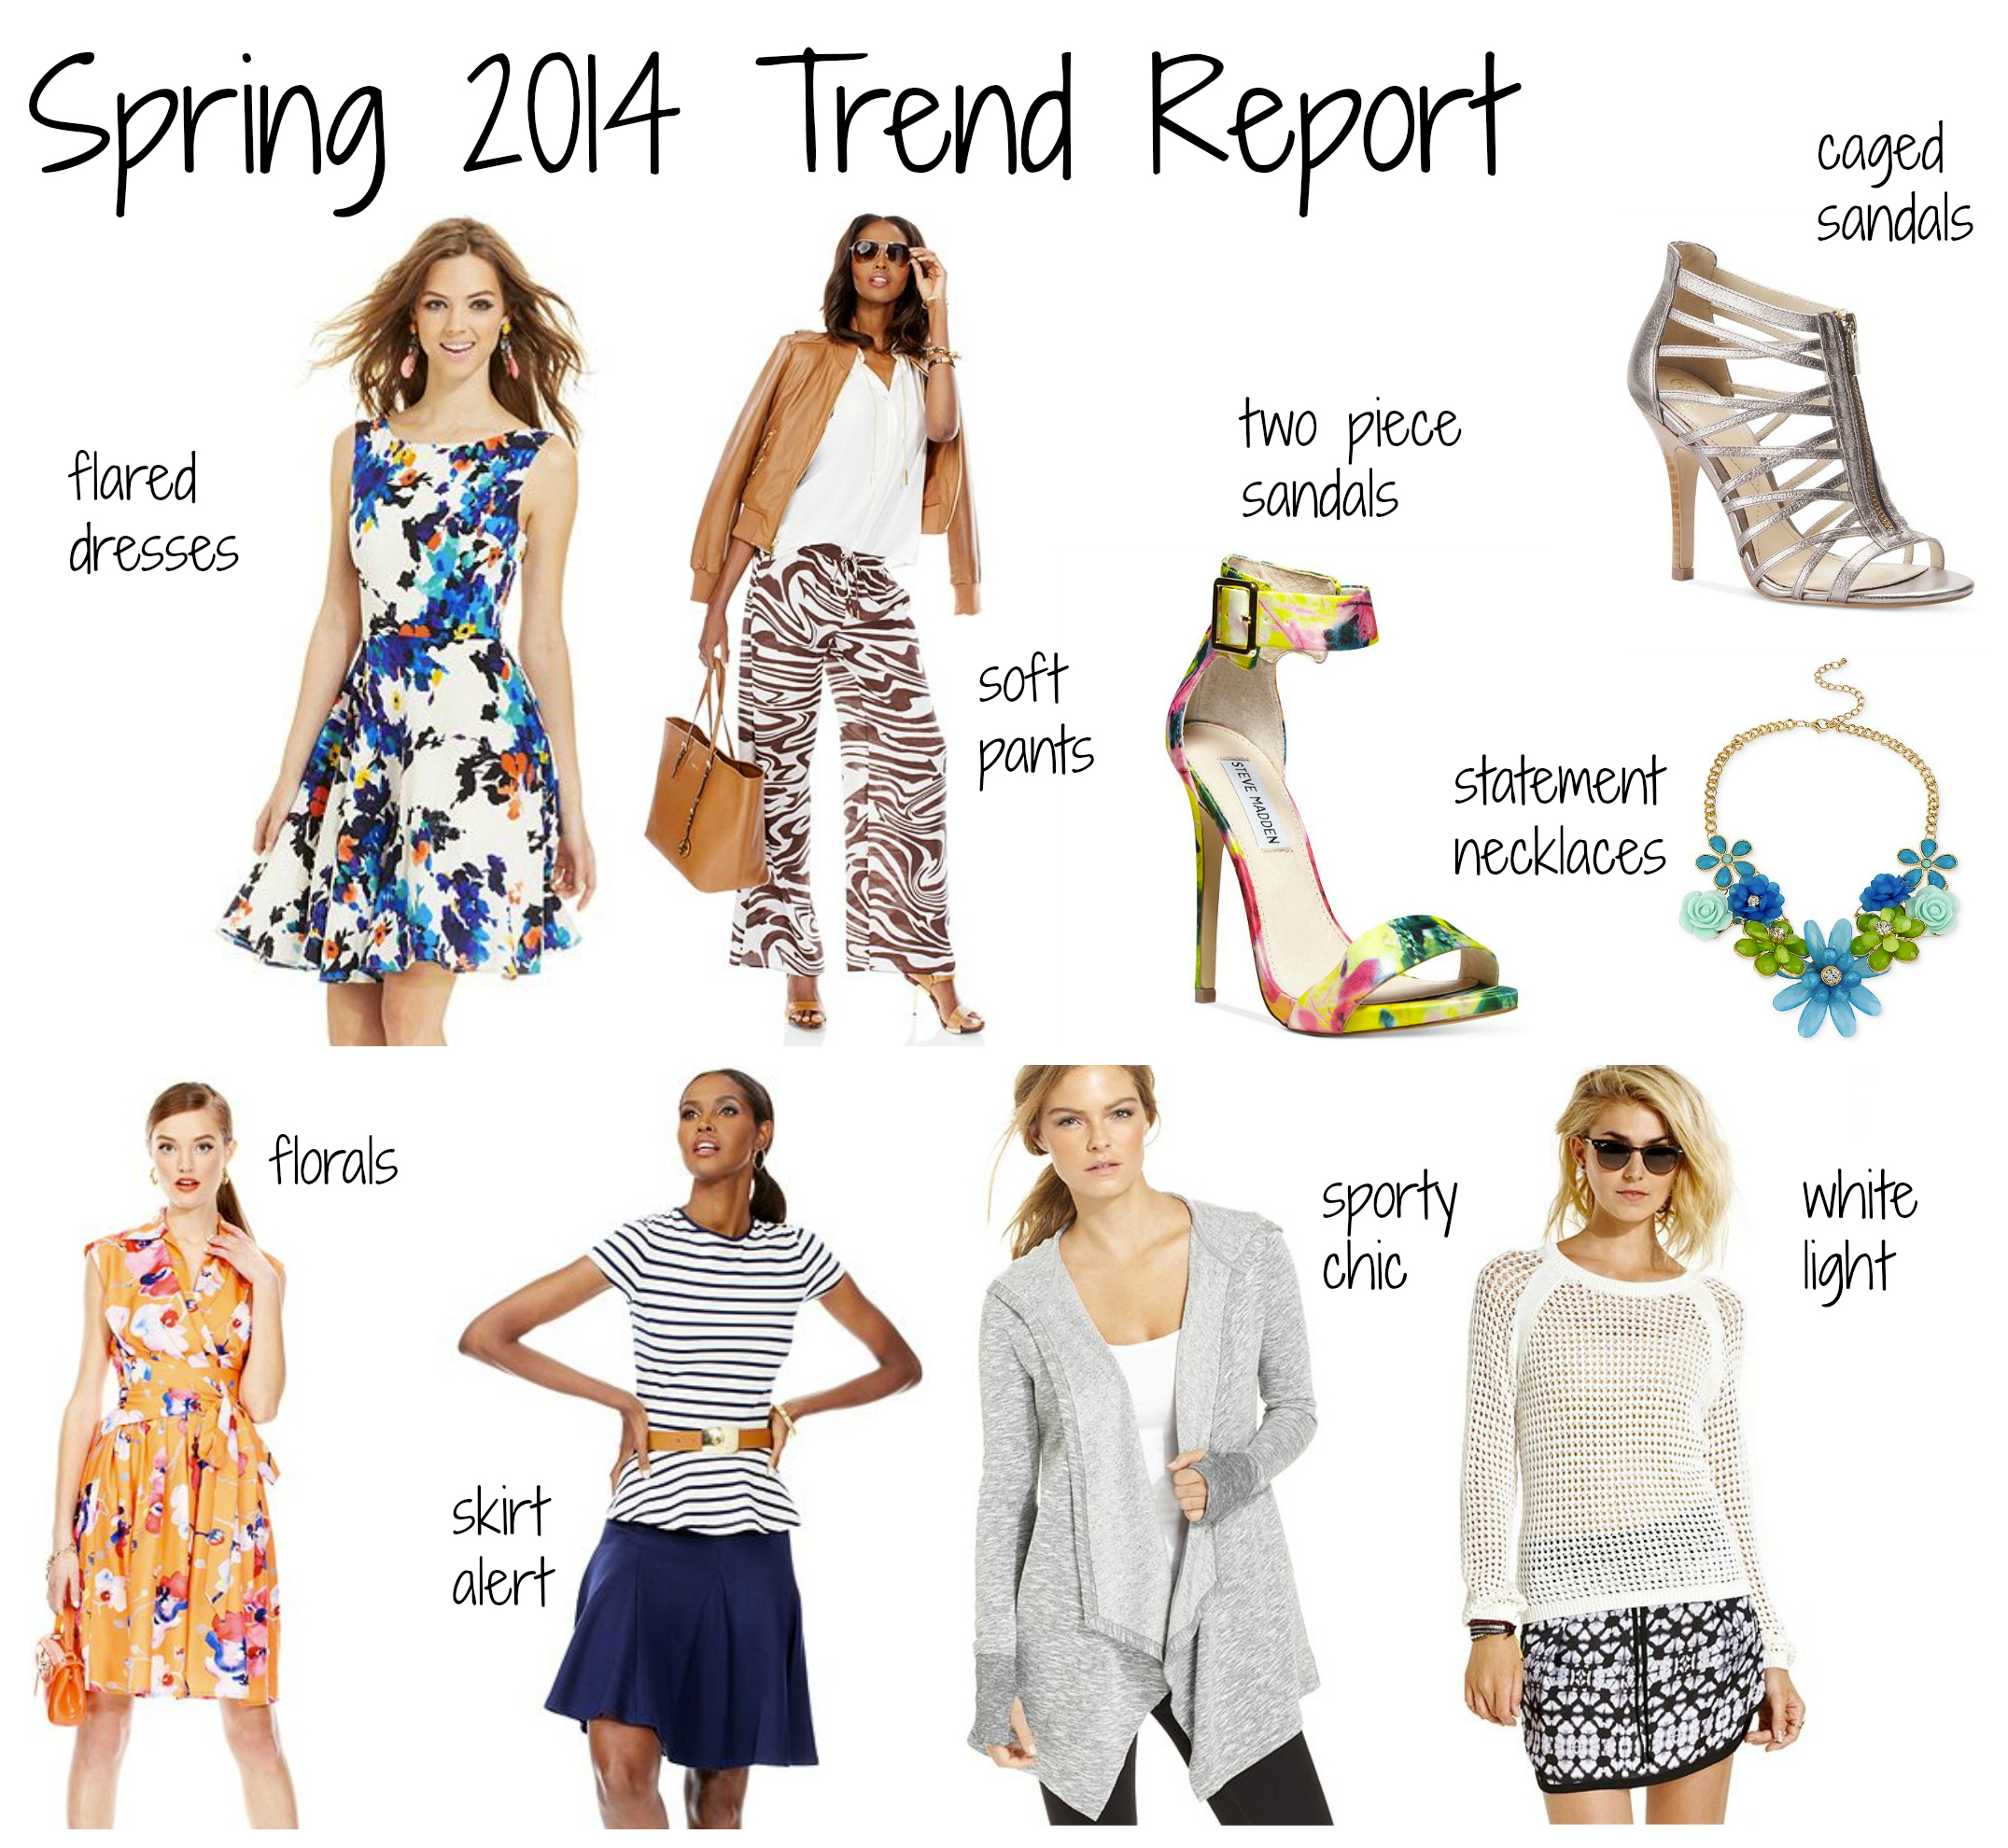 Spring 2014 Trend Report